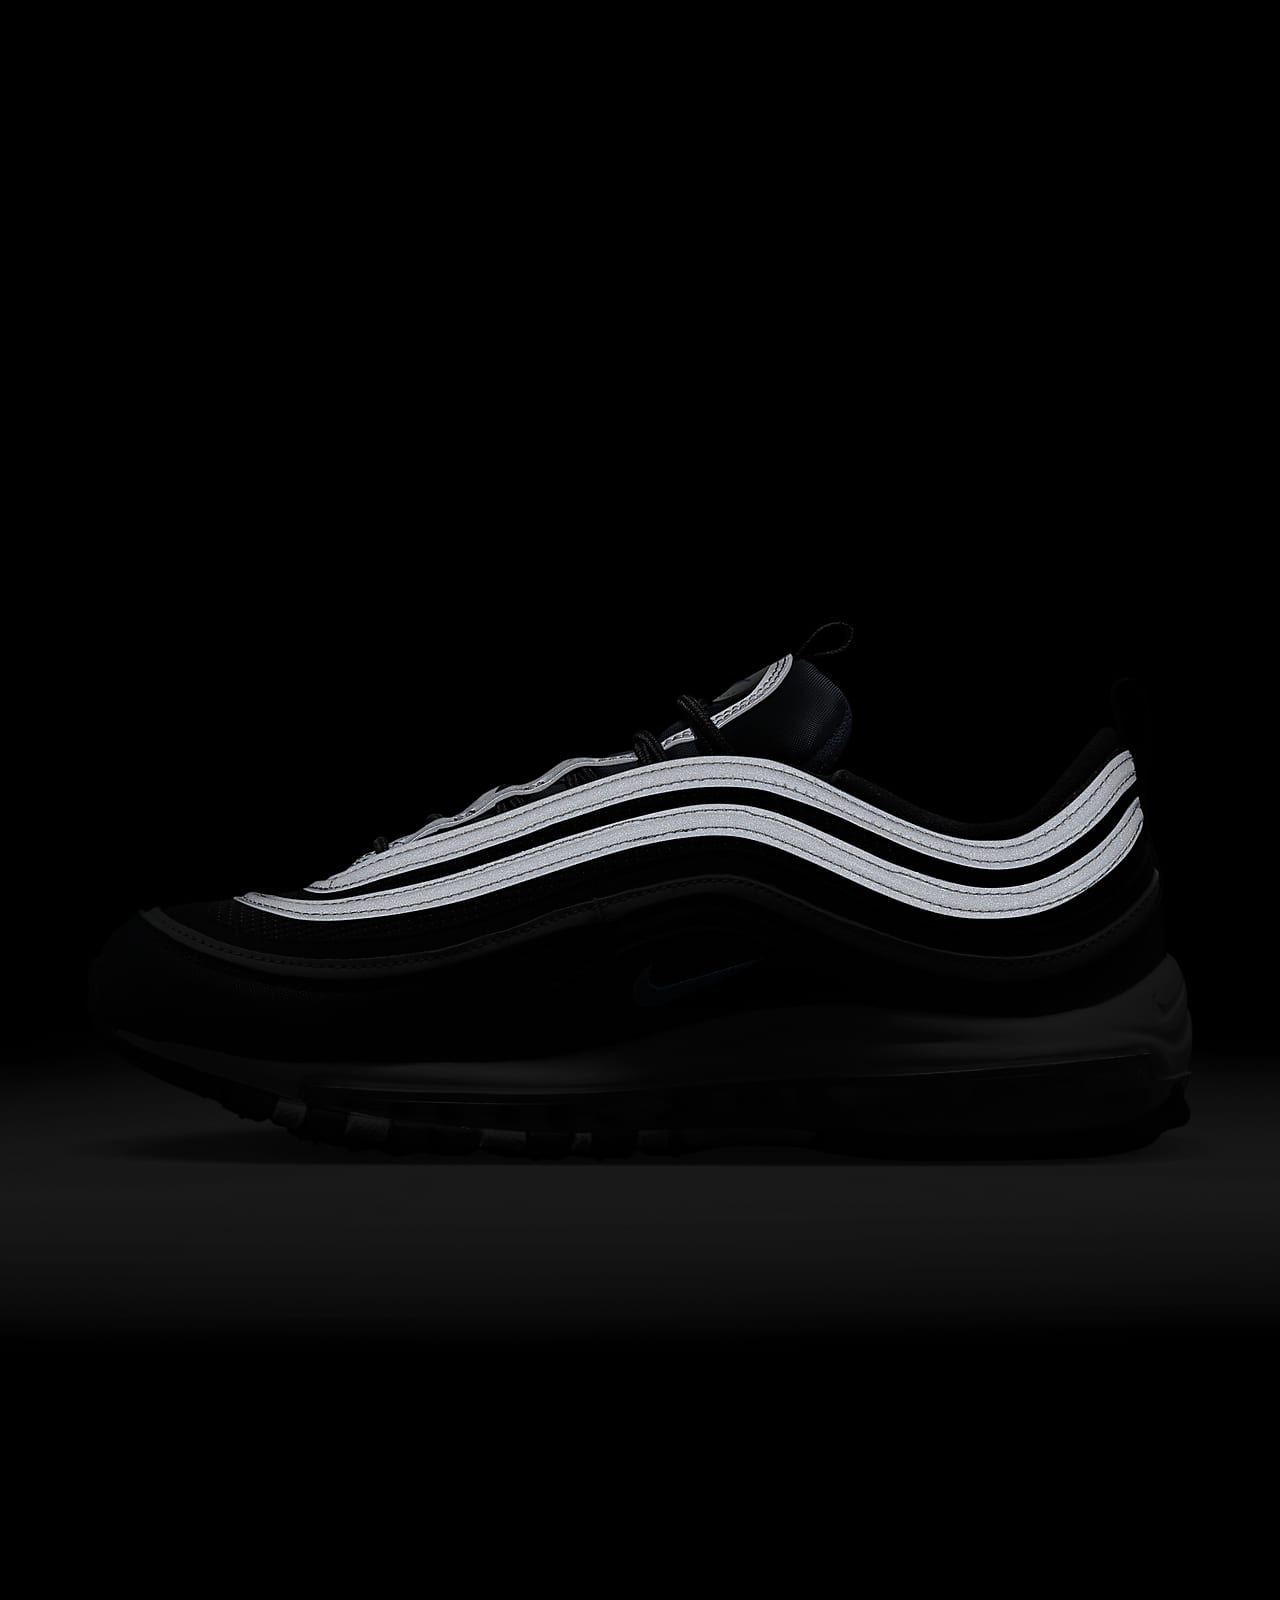 size 11 nike air max 97 shoes